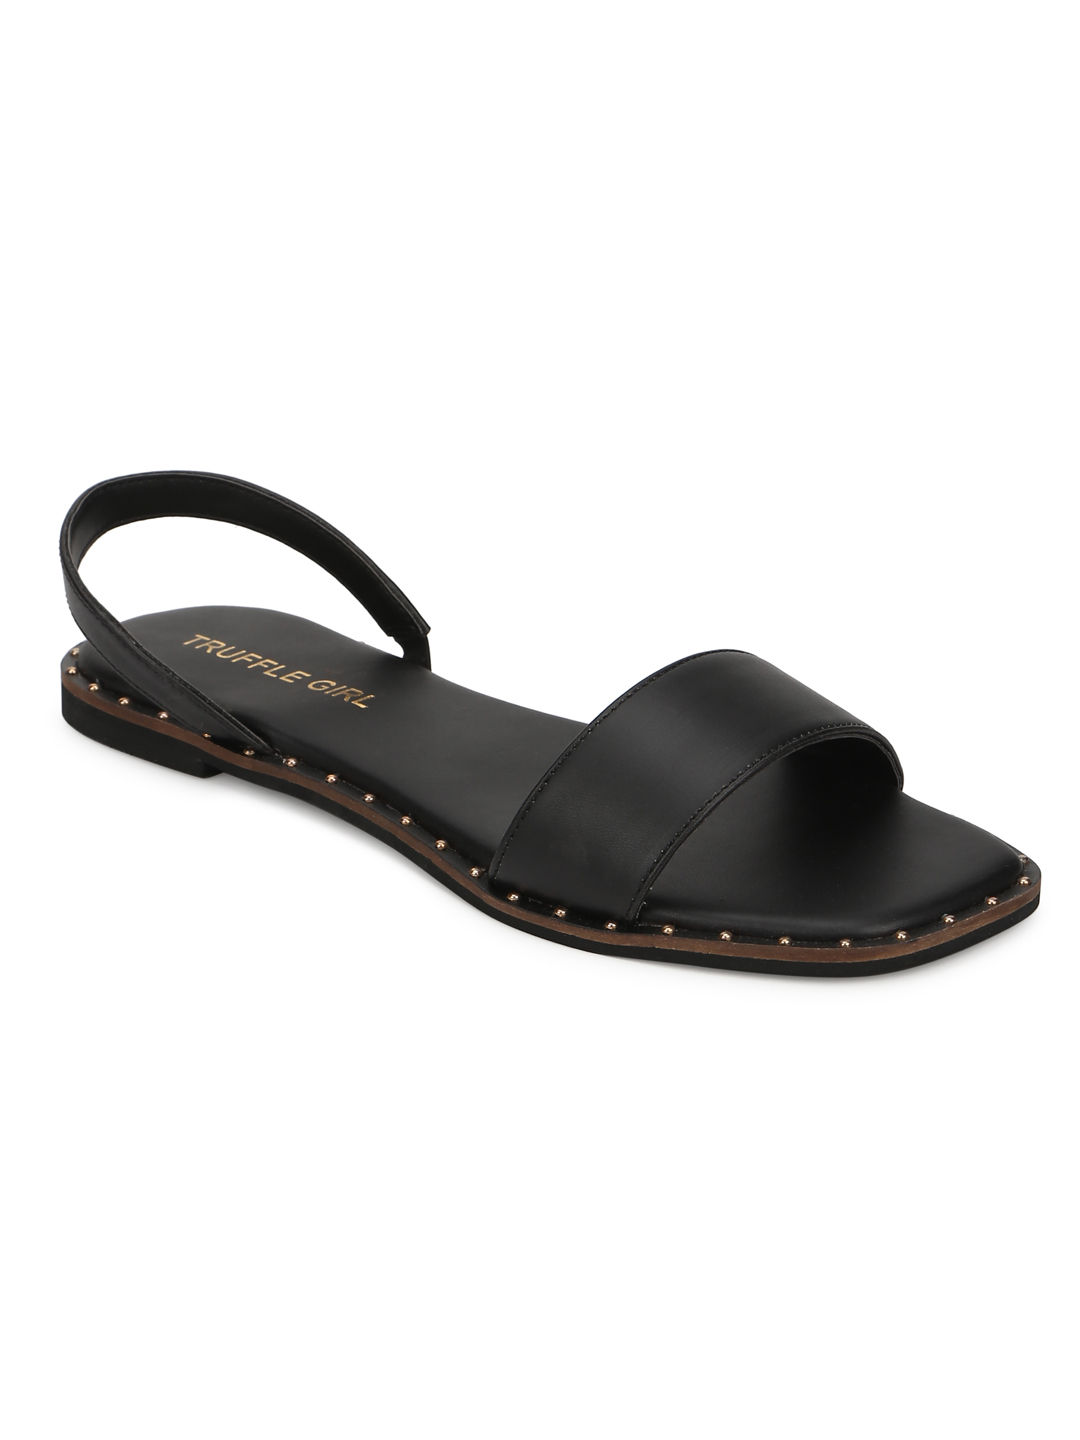 Flats - Buy Womens Flats and Sandals Online in India | Myntra